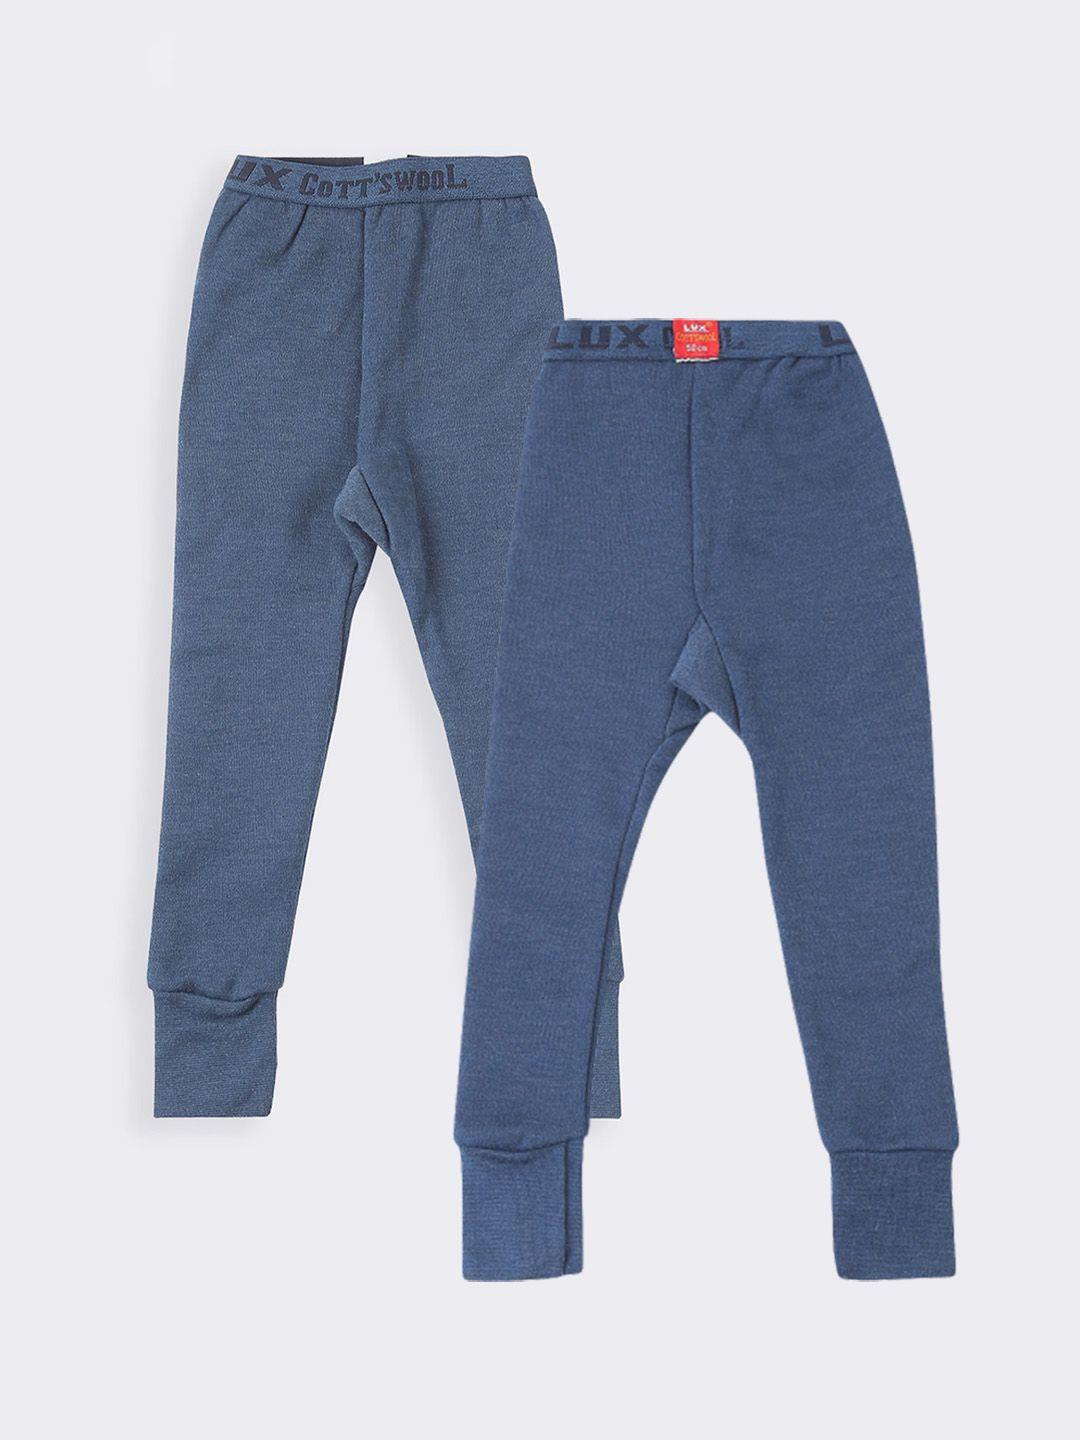 lux-cottswool-boys-pack-of-2-blue-solid-cotton-thermal-bottoms